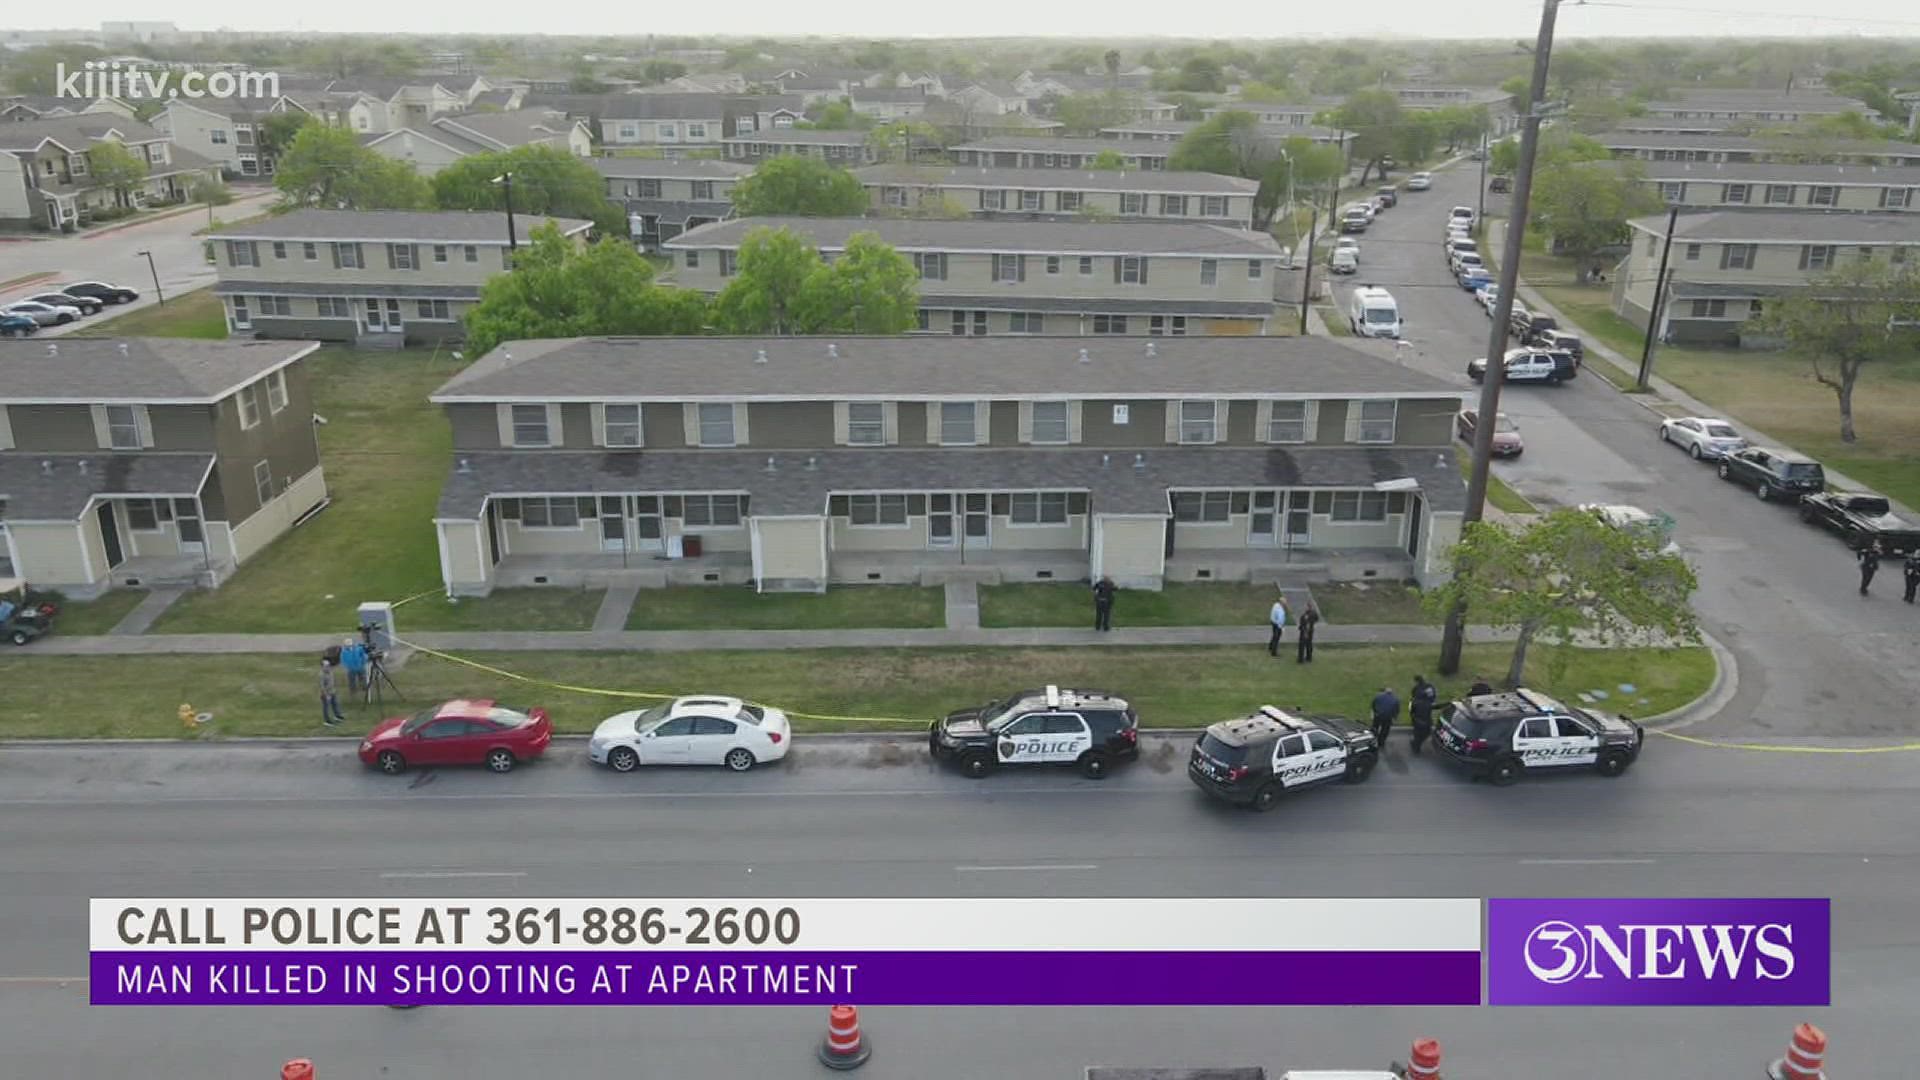 Corpus Christi police were called to La Armada Apartments off Port Ave. and found a 46-year-old David Charles McEntire with a gunshot wound.